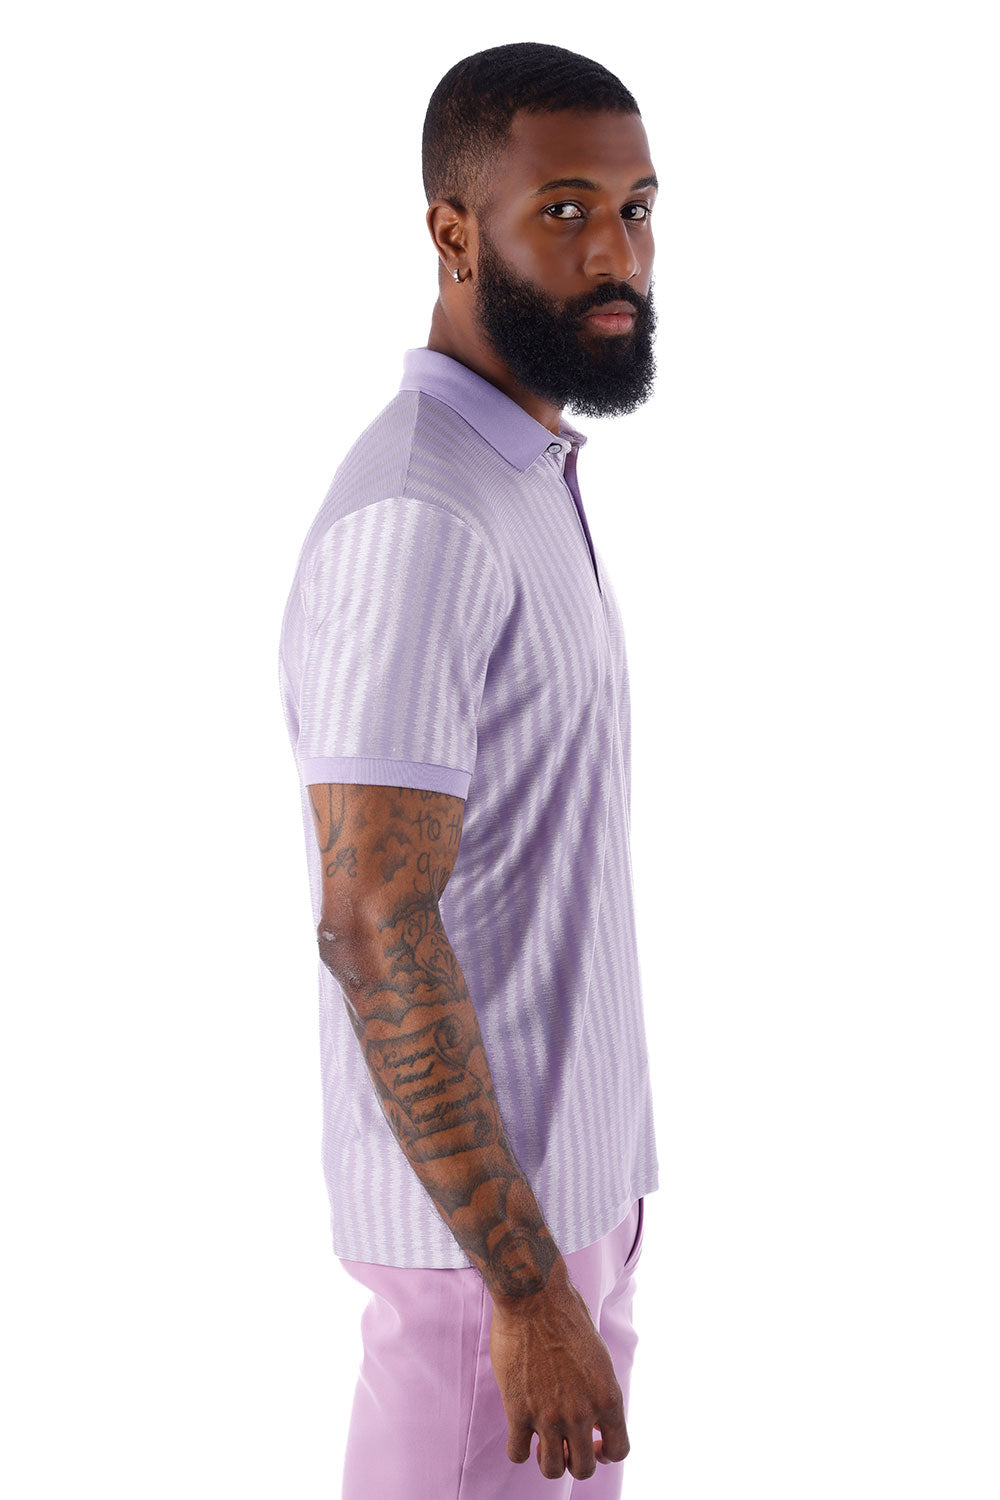 Barabas Men's Striped Solid Color Stretch Luxury Polo Shirts 4P30 Lavender